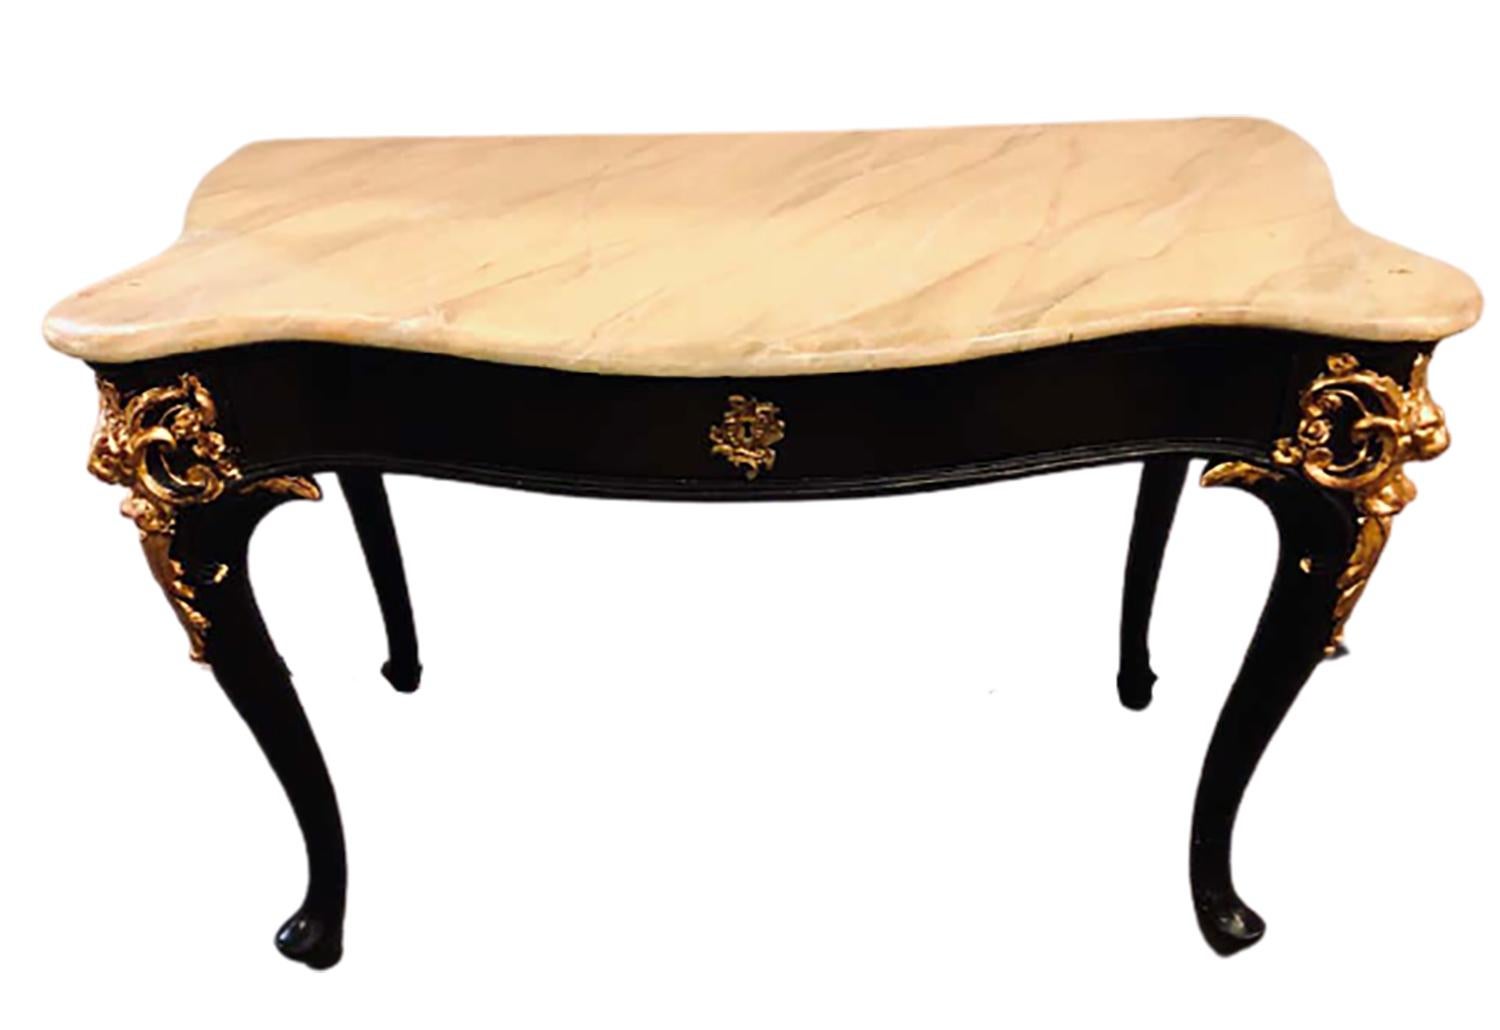 Hollywood Regency Fine Louis XV Style Ebony and Parcel Gilt Desk or Console or Serving Table